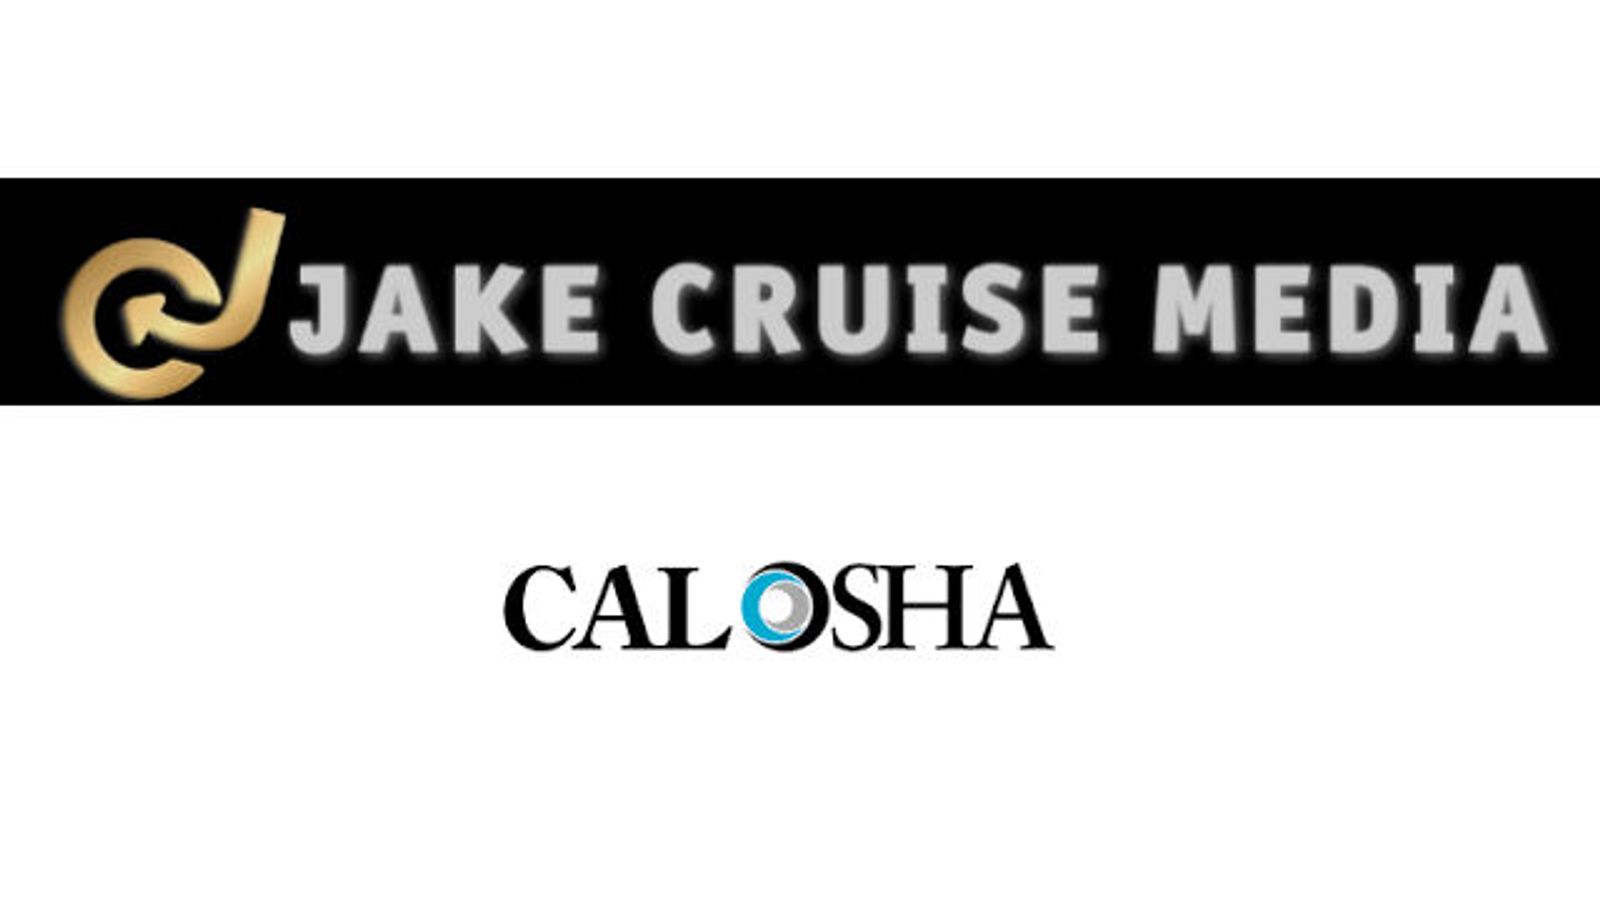 Cal/OSHA Fines Jake Cruise Media for Workplace Violations